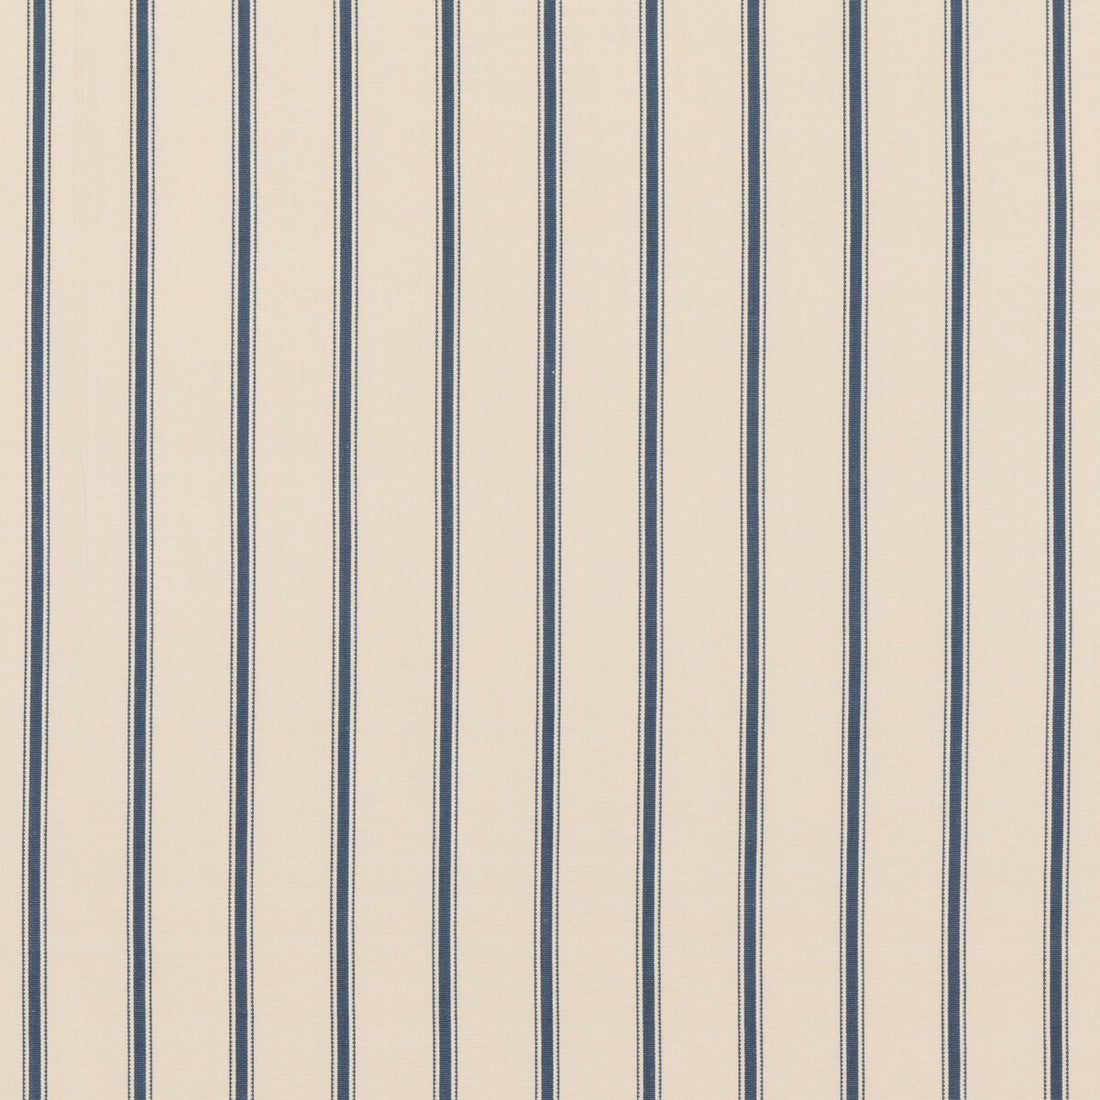 Searle fabric in indigo color - pattern ED85302.680.0 - by Threads in the Great Stripes collection